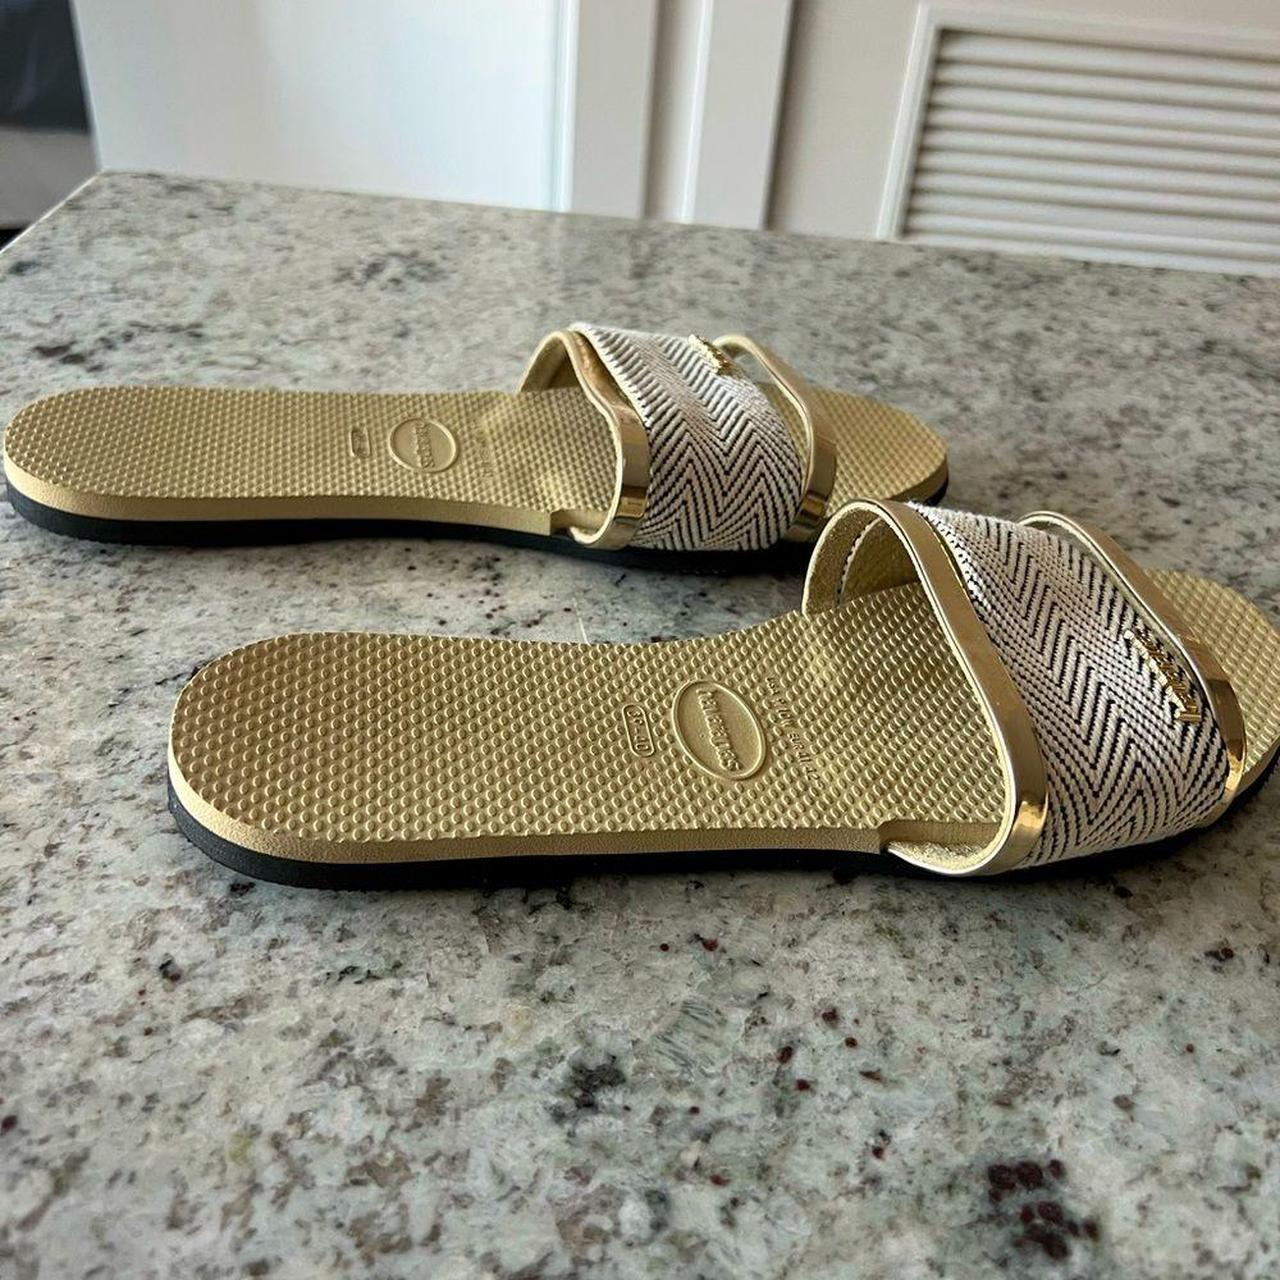 Havaianas Women's Tan and Gold Sandals (3)